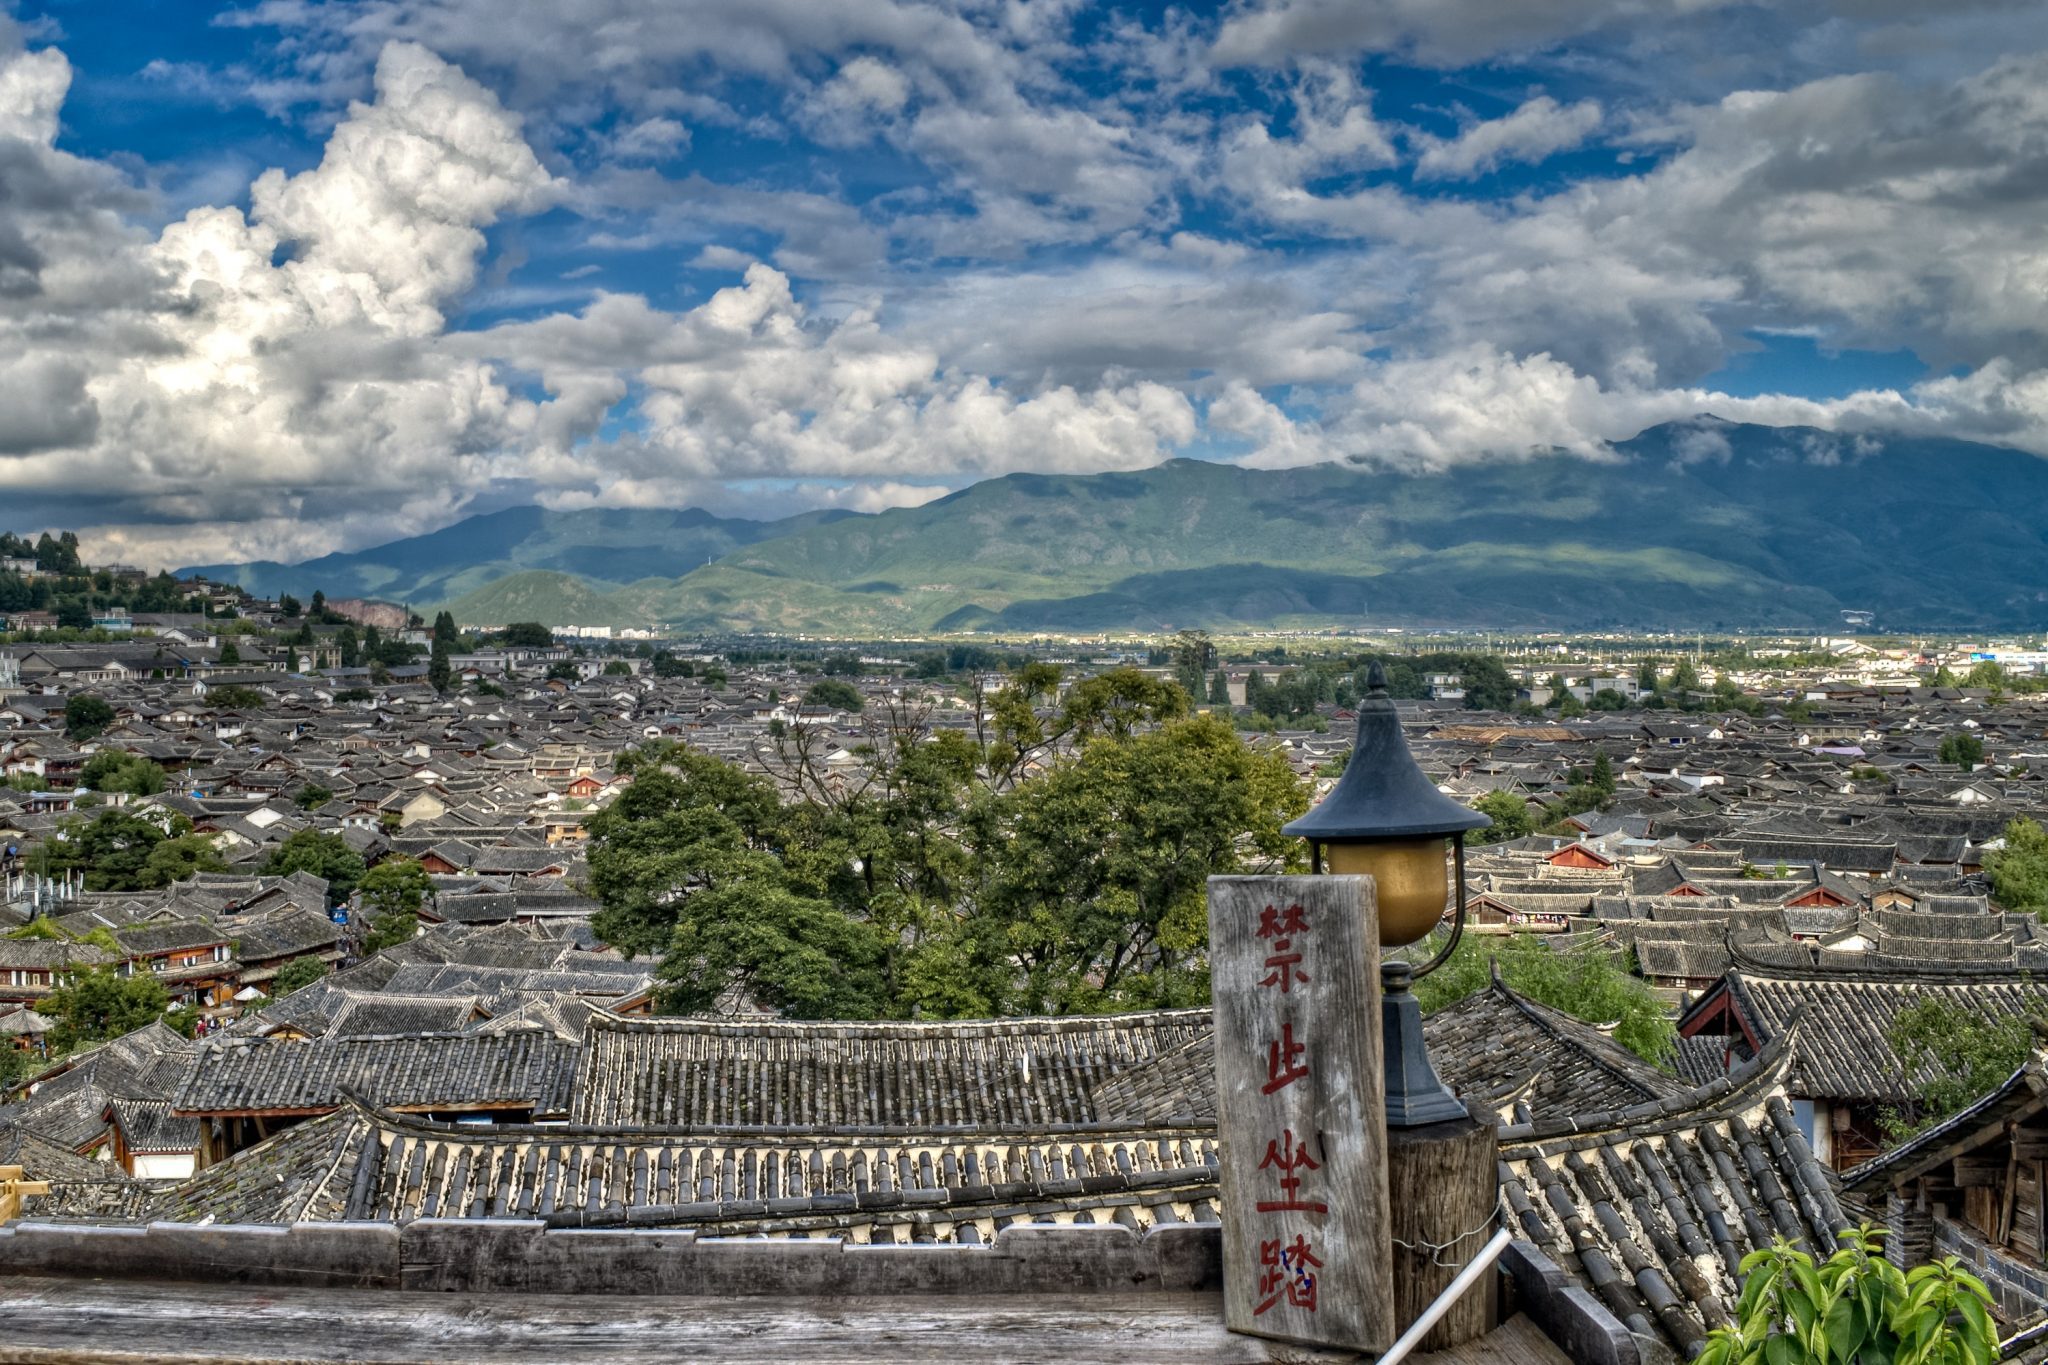 Flights from Beijing to popular tourist destination Lijiang, a small city in China's Yunnan Province, are selling out according to travel service provider Qunar.com.